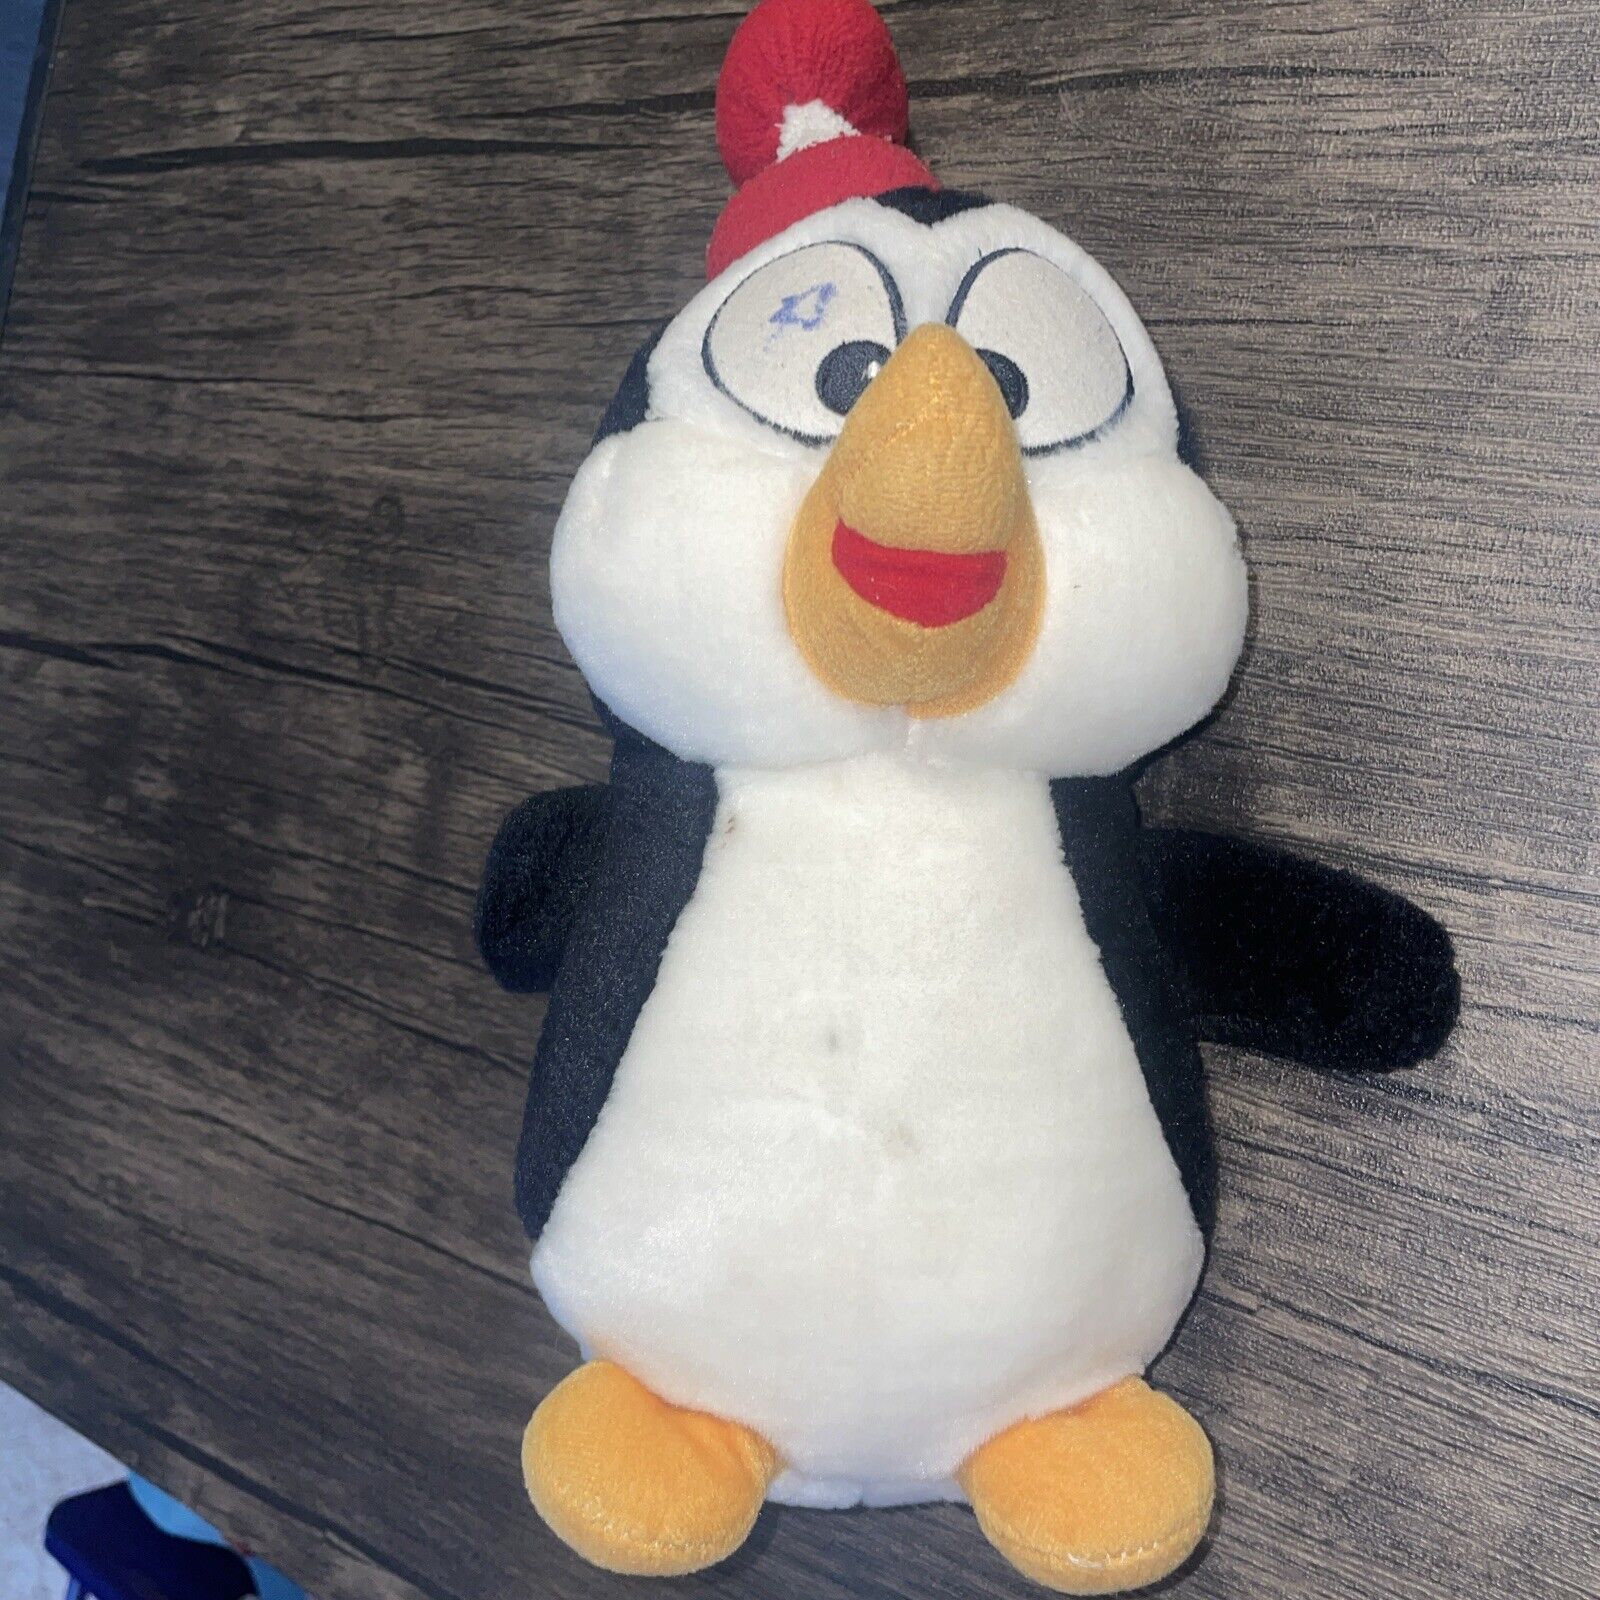 1982 Walter Lantz Chilly Willy Penguin Plush Beanie Animal with Rubber Face